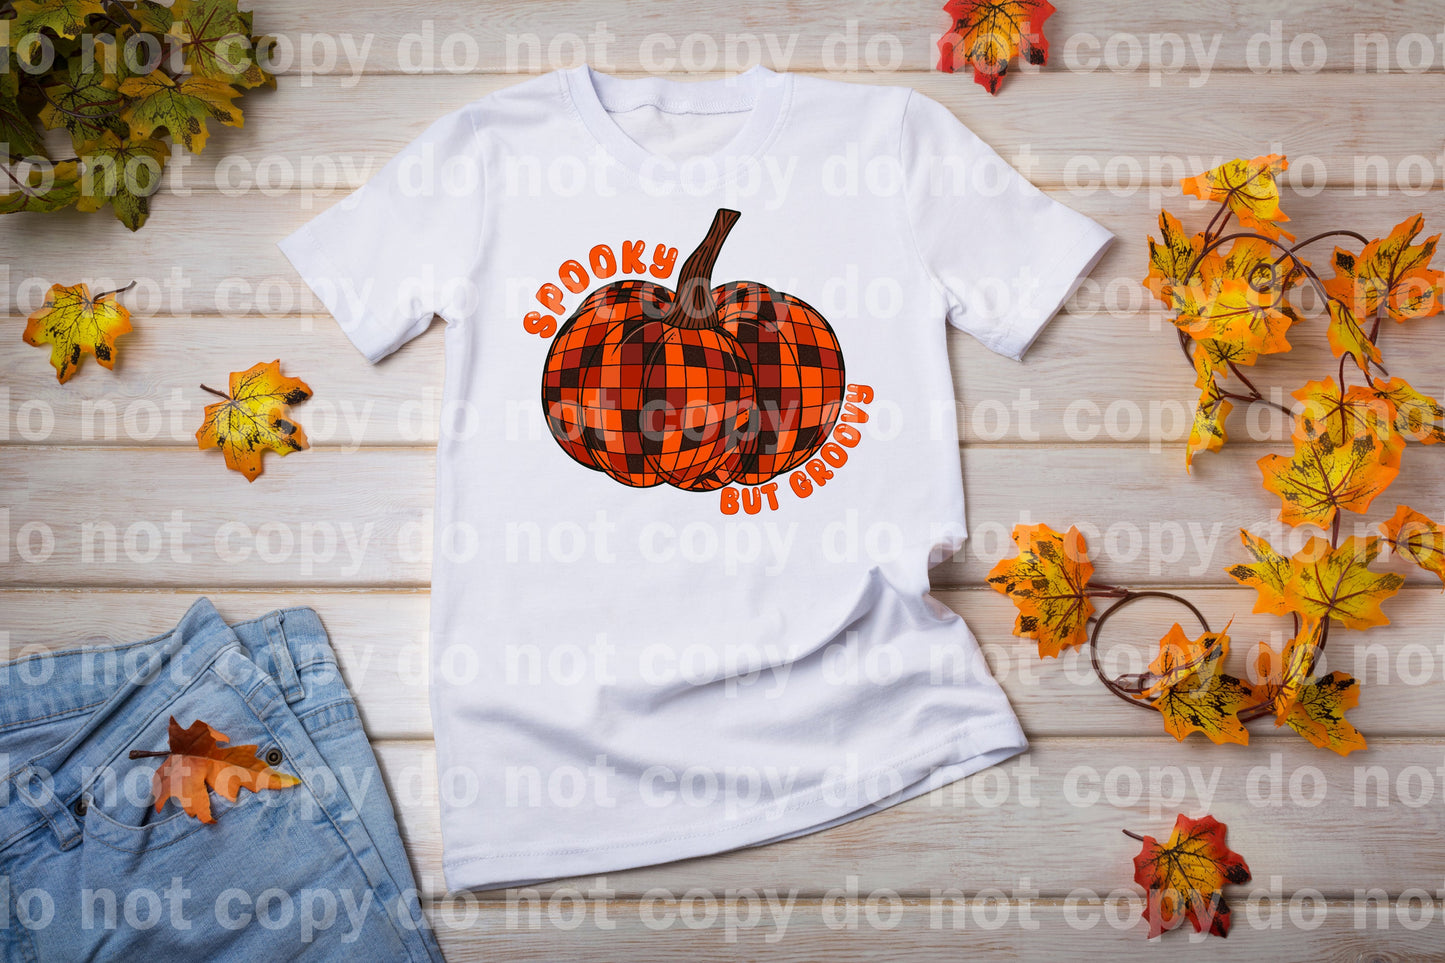 Spooky But Groovy Dream Print or Sublimation Print